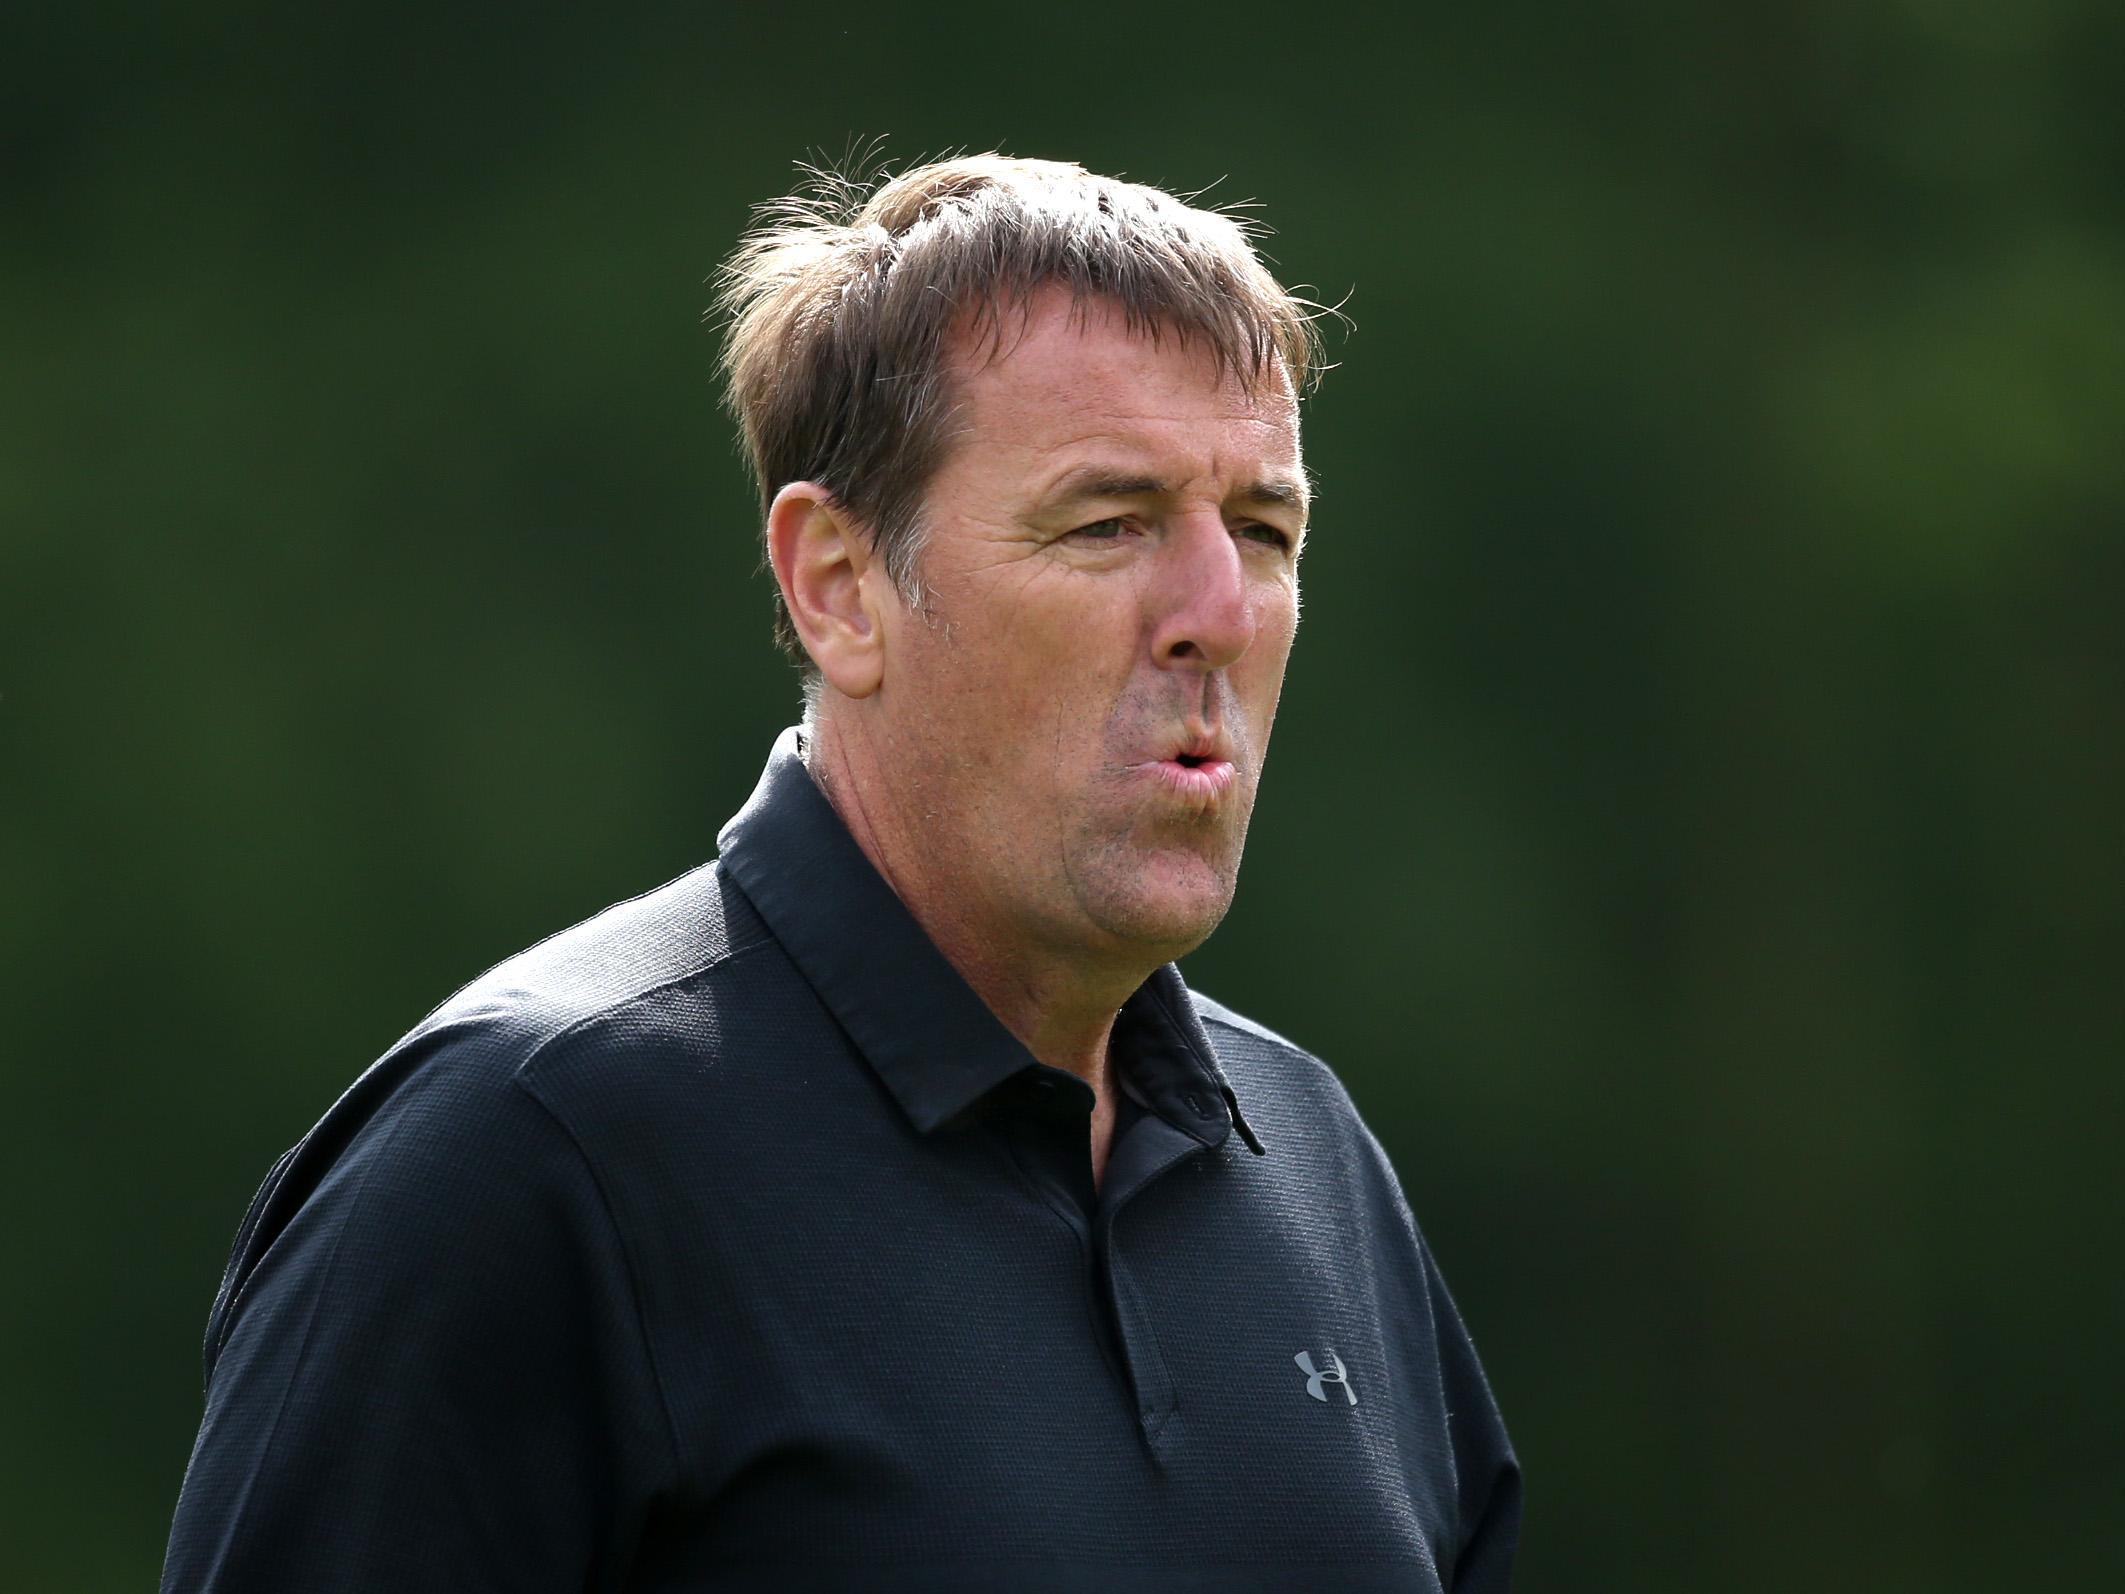 Matt Le Tissier has apologised and deleted a Twitter post that was related to Holocaust victim Anne Frank